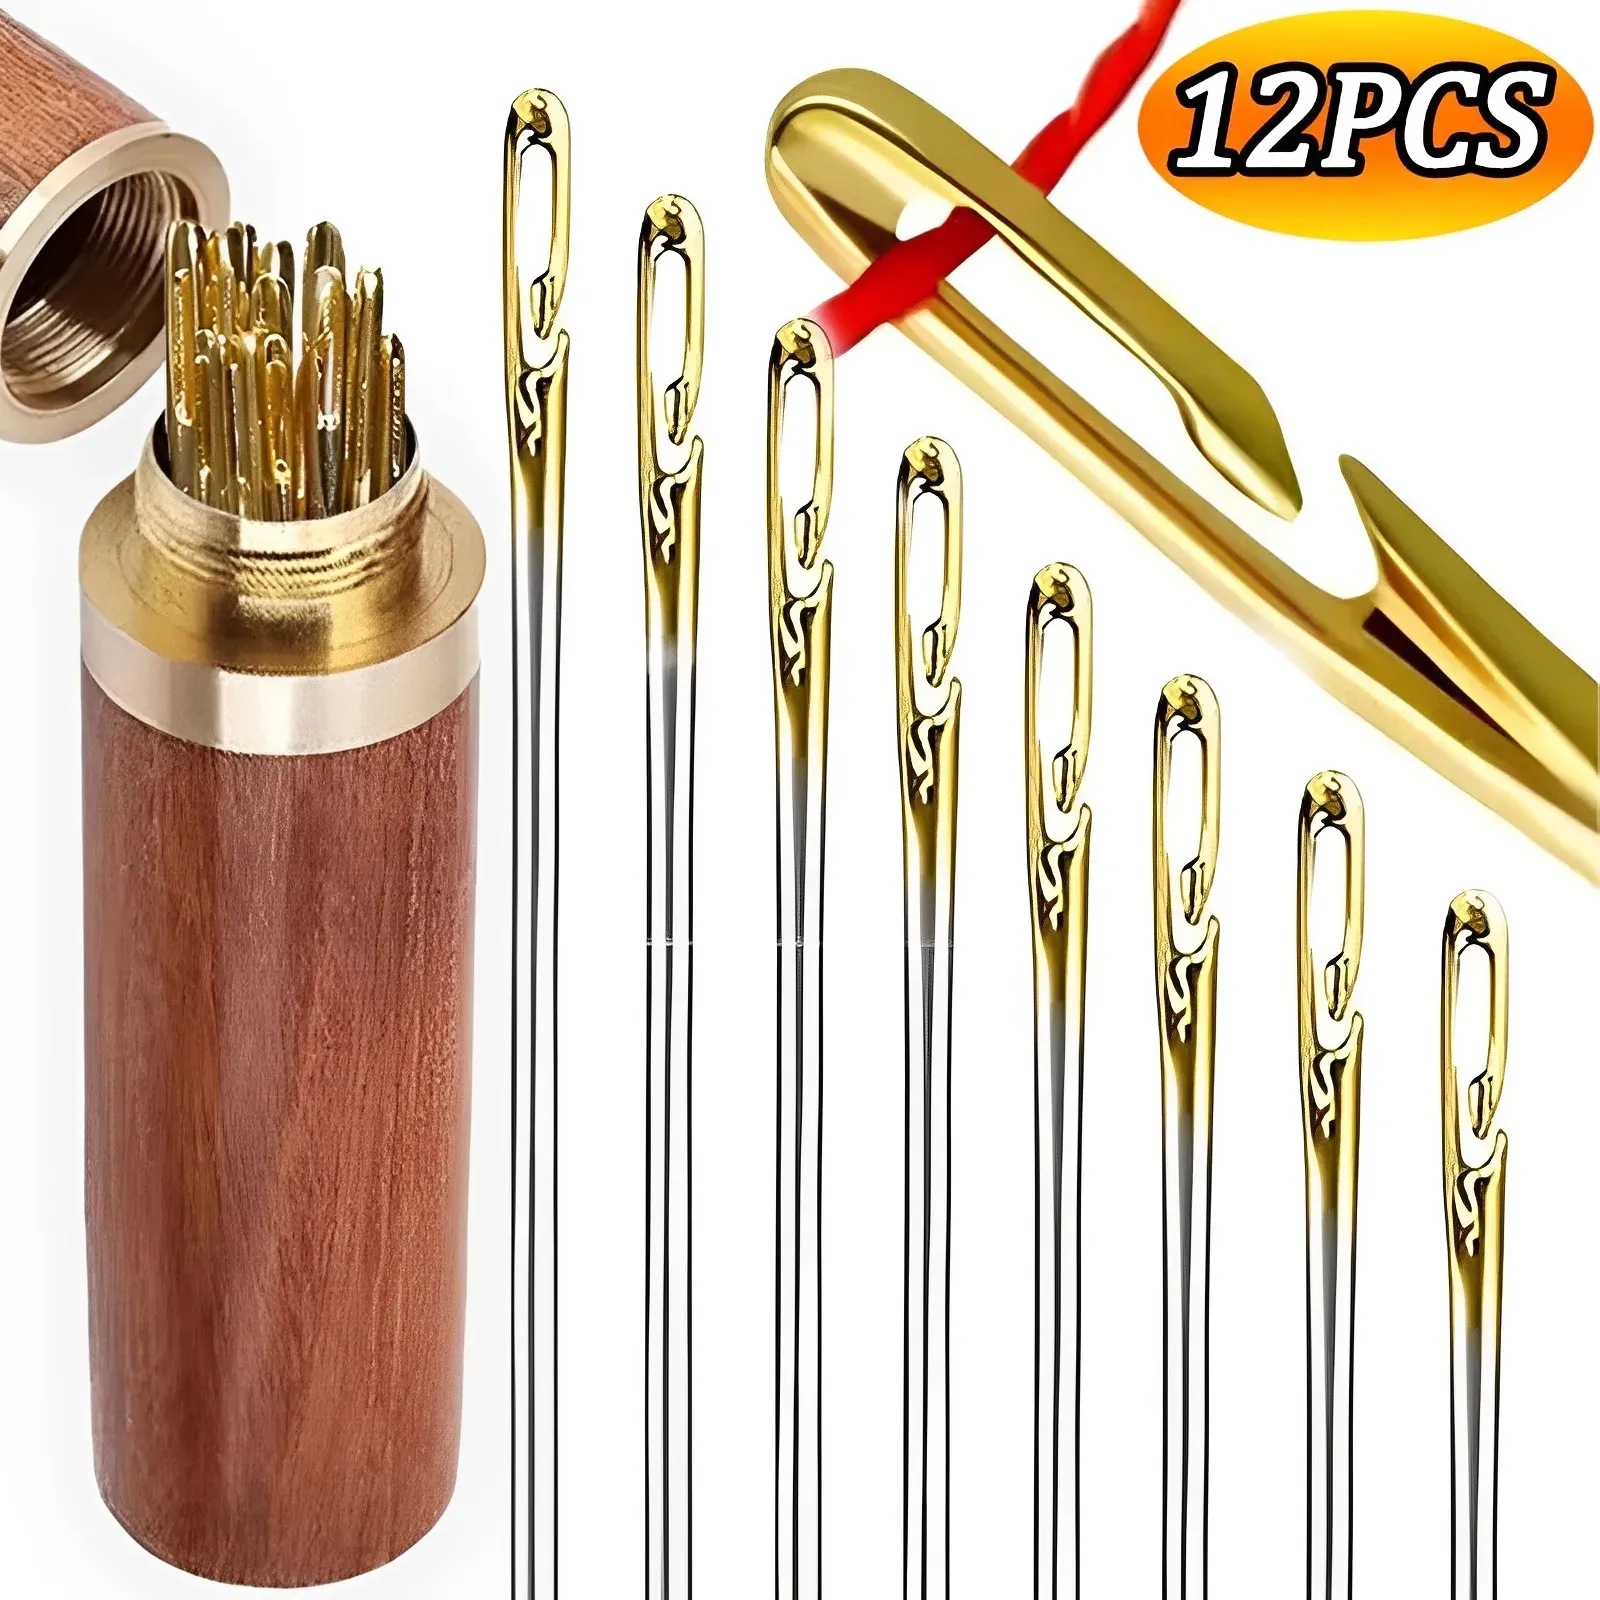 12PCS Side Holes Blind Needles Sewing Stainless Steel Elderly Needle for Sewing Household DIY Beading Threading Needles